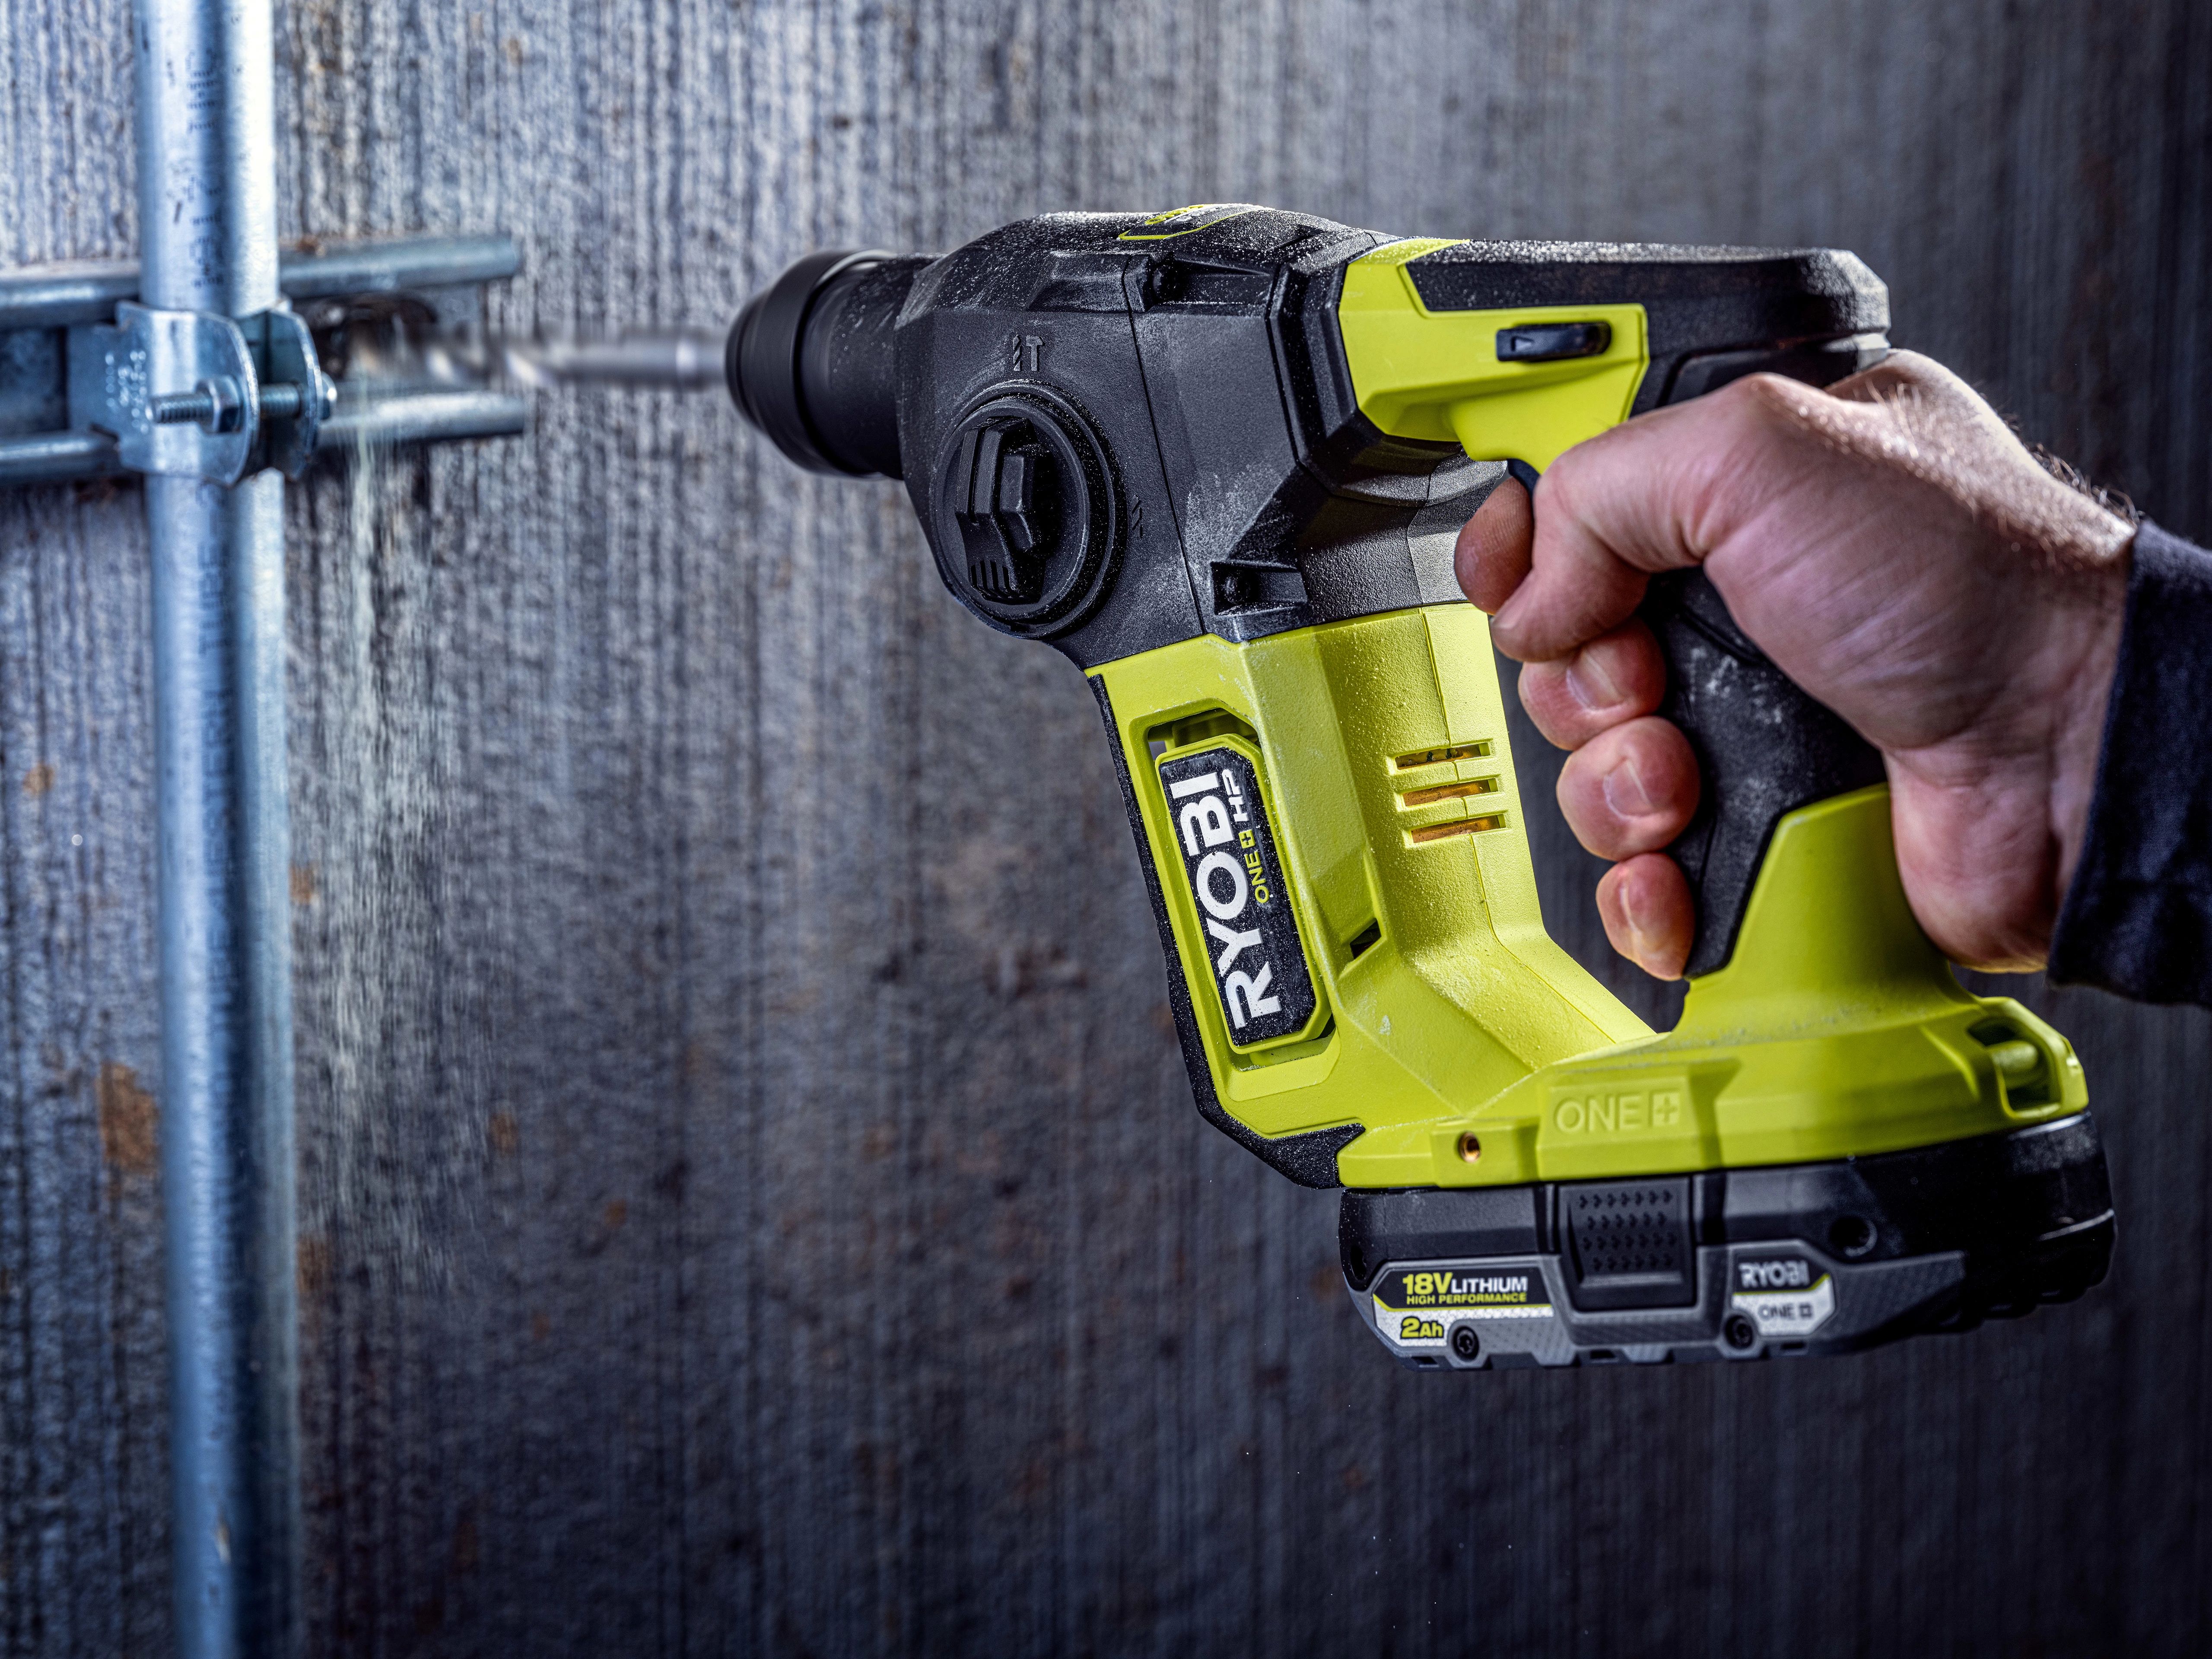 Rotary Hammer and Drill